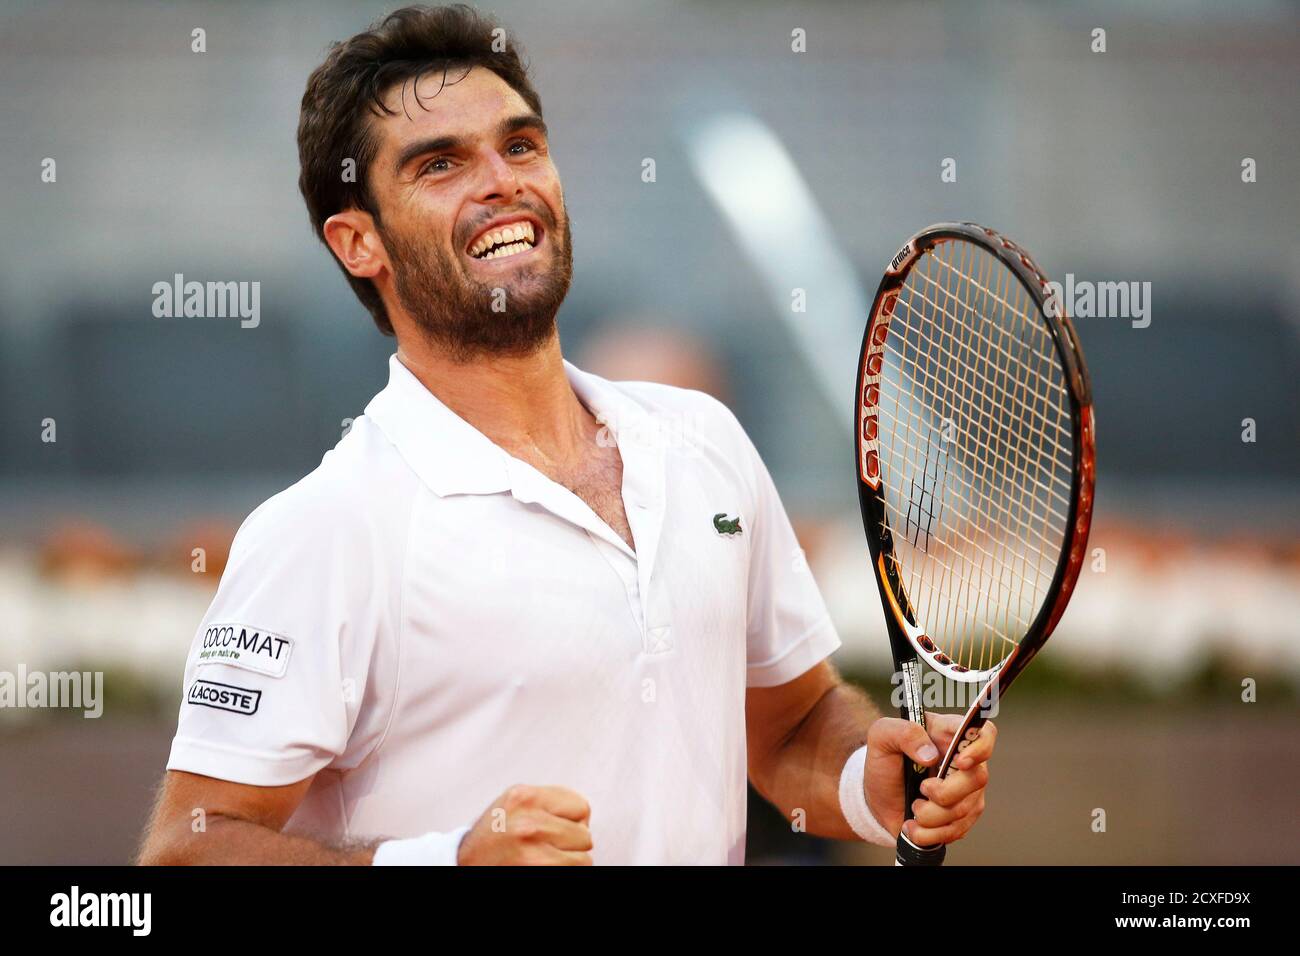 Pablo Andujar of Spain celebrates his victory against Kei Nishikori of  Japan at the end of their men's singles quarterfinal match at the Madrid  Open tennis tournament, May 10, 2013. REUTERS/Juan Medina (